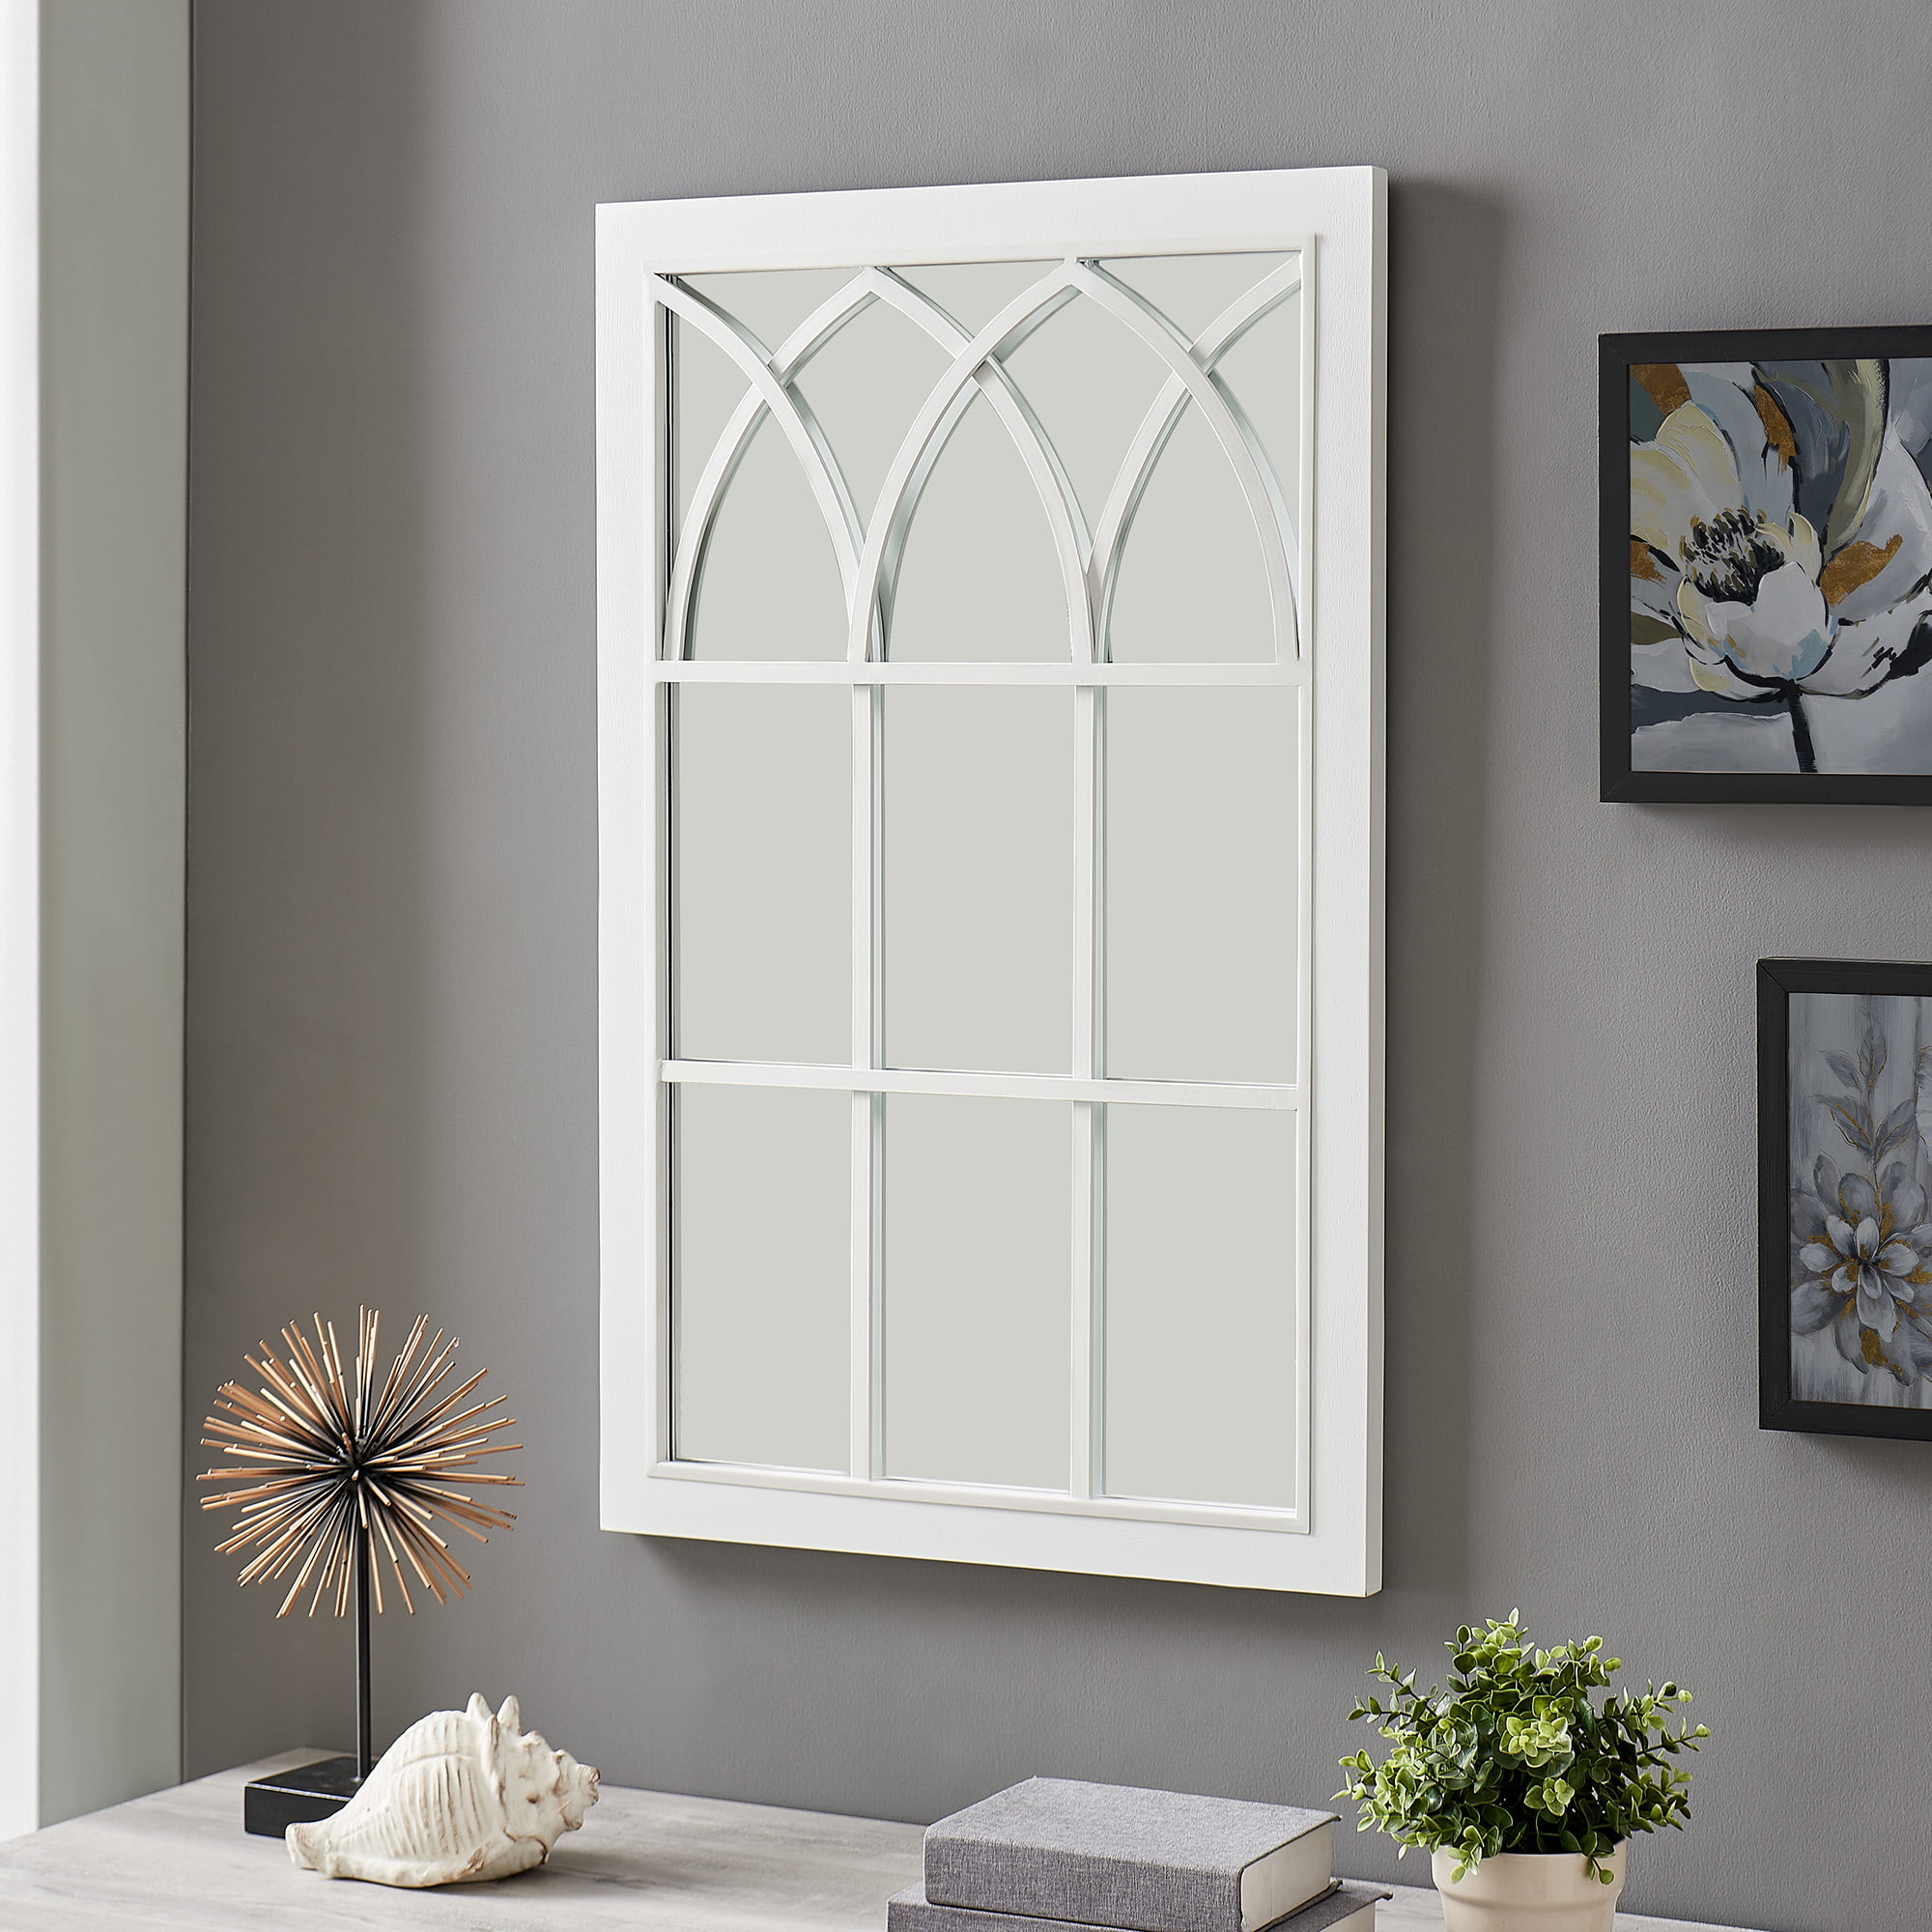 Cream arched window style wall mirror shabby vintage chic living room hallway